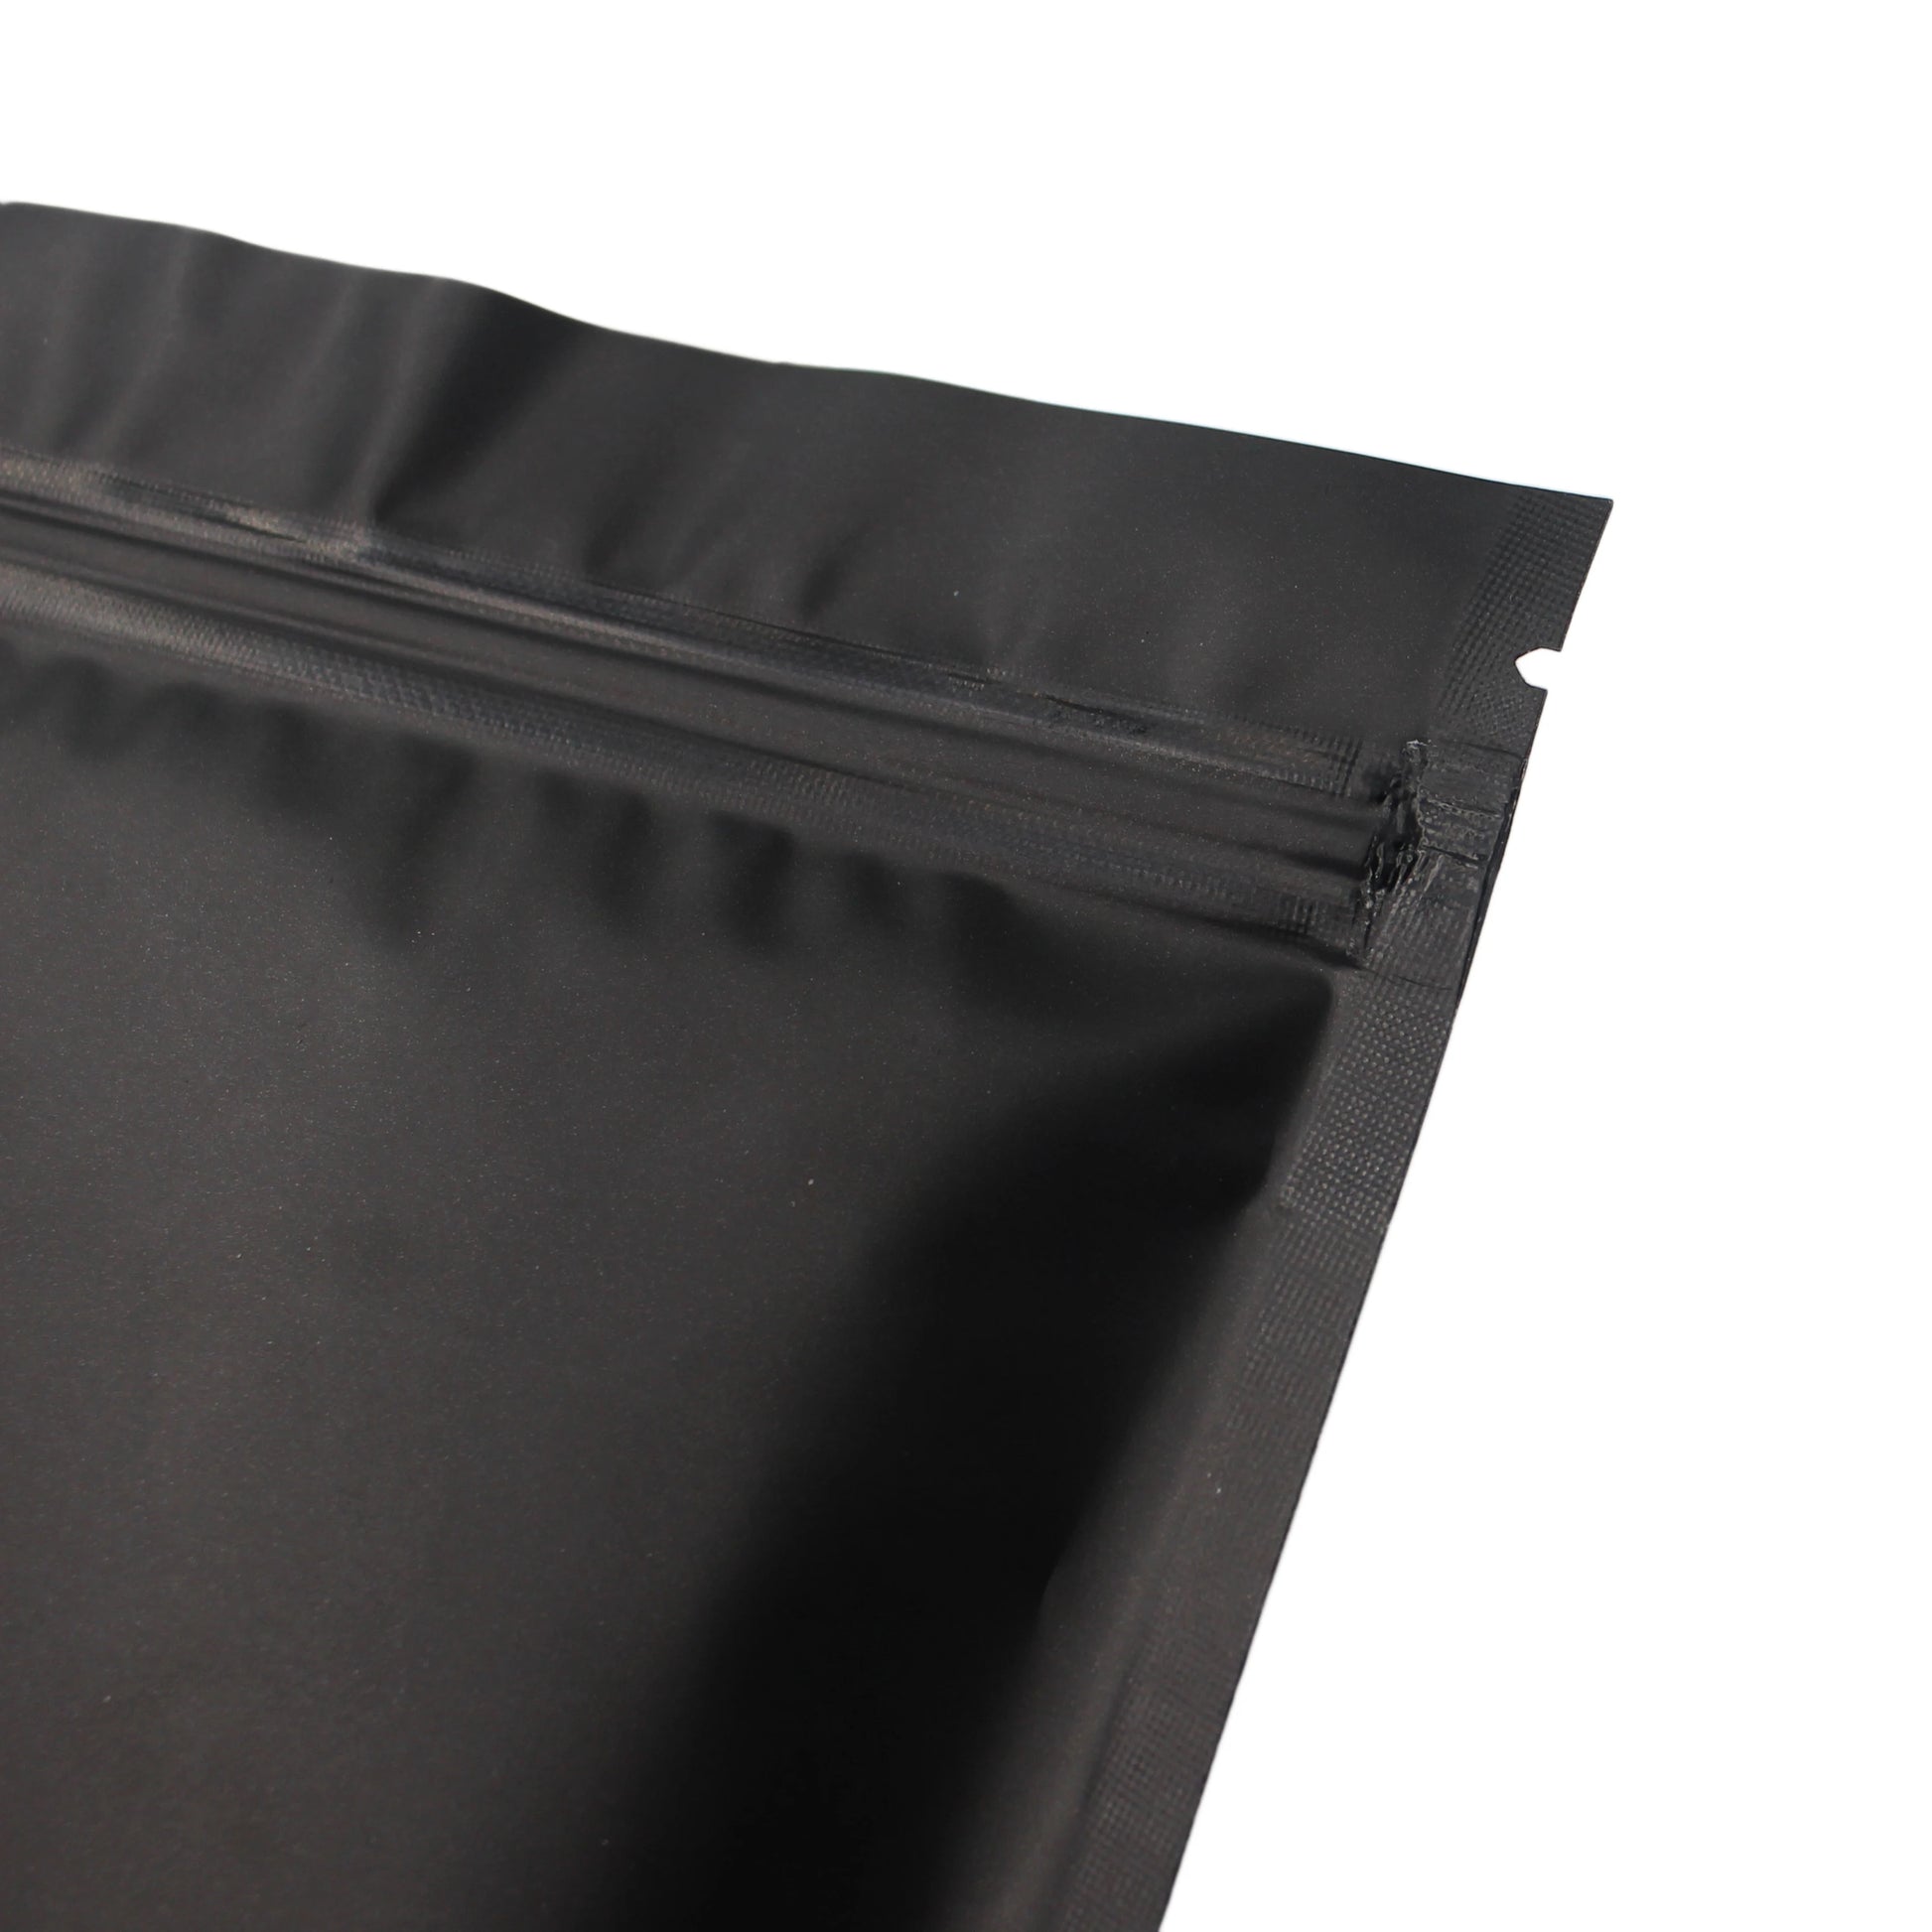 The side angle of a Resealable Mylar Bag showcases its sturdy construction, ready to protect your aromatic contents with its reliable, smell-proof design.